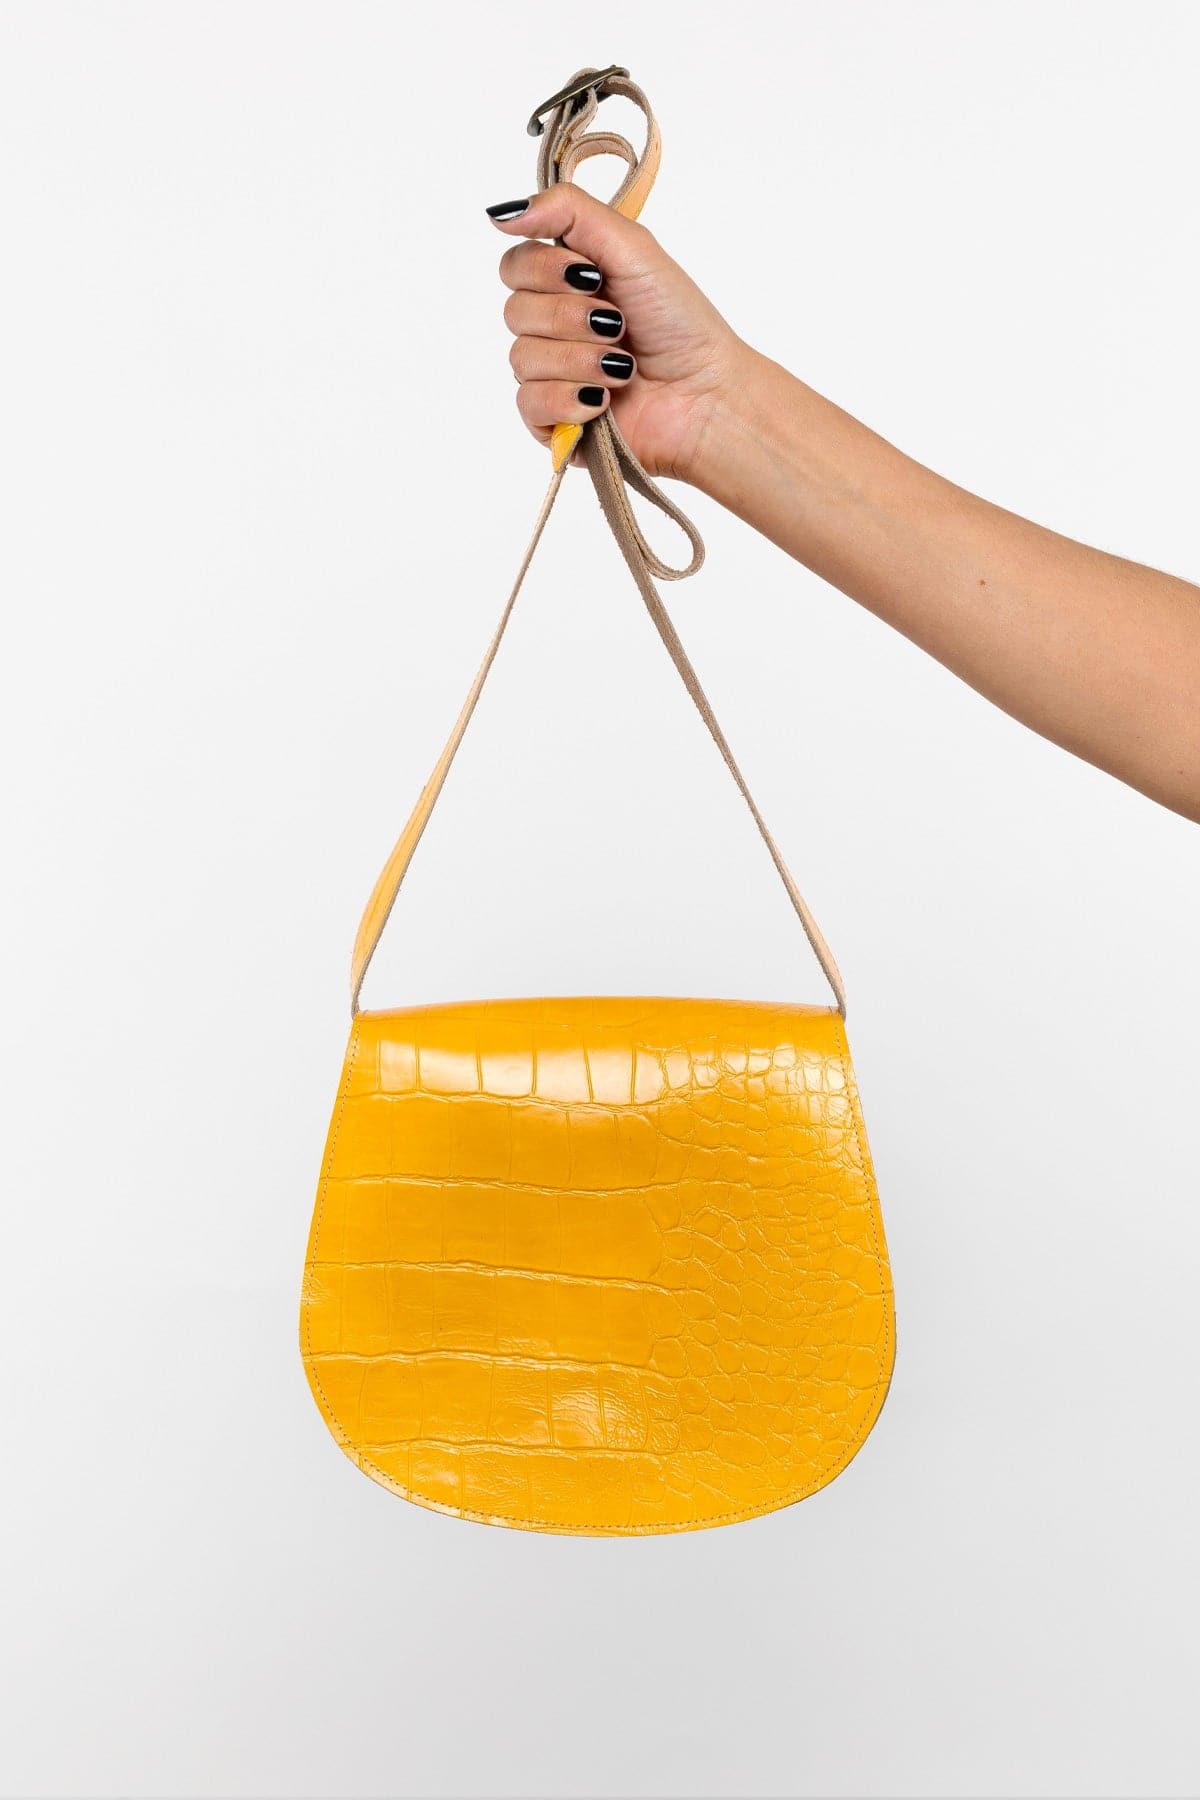 Los Angeles Apparel | Classic Leather Saddle Bag for Women in Yellow Crocodile